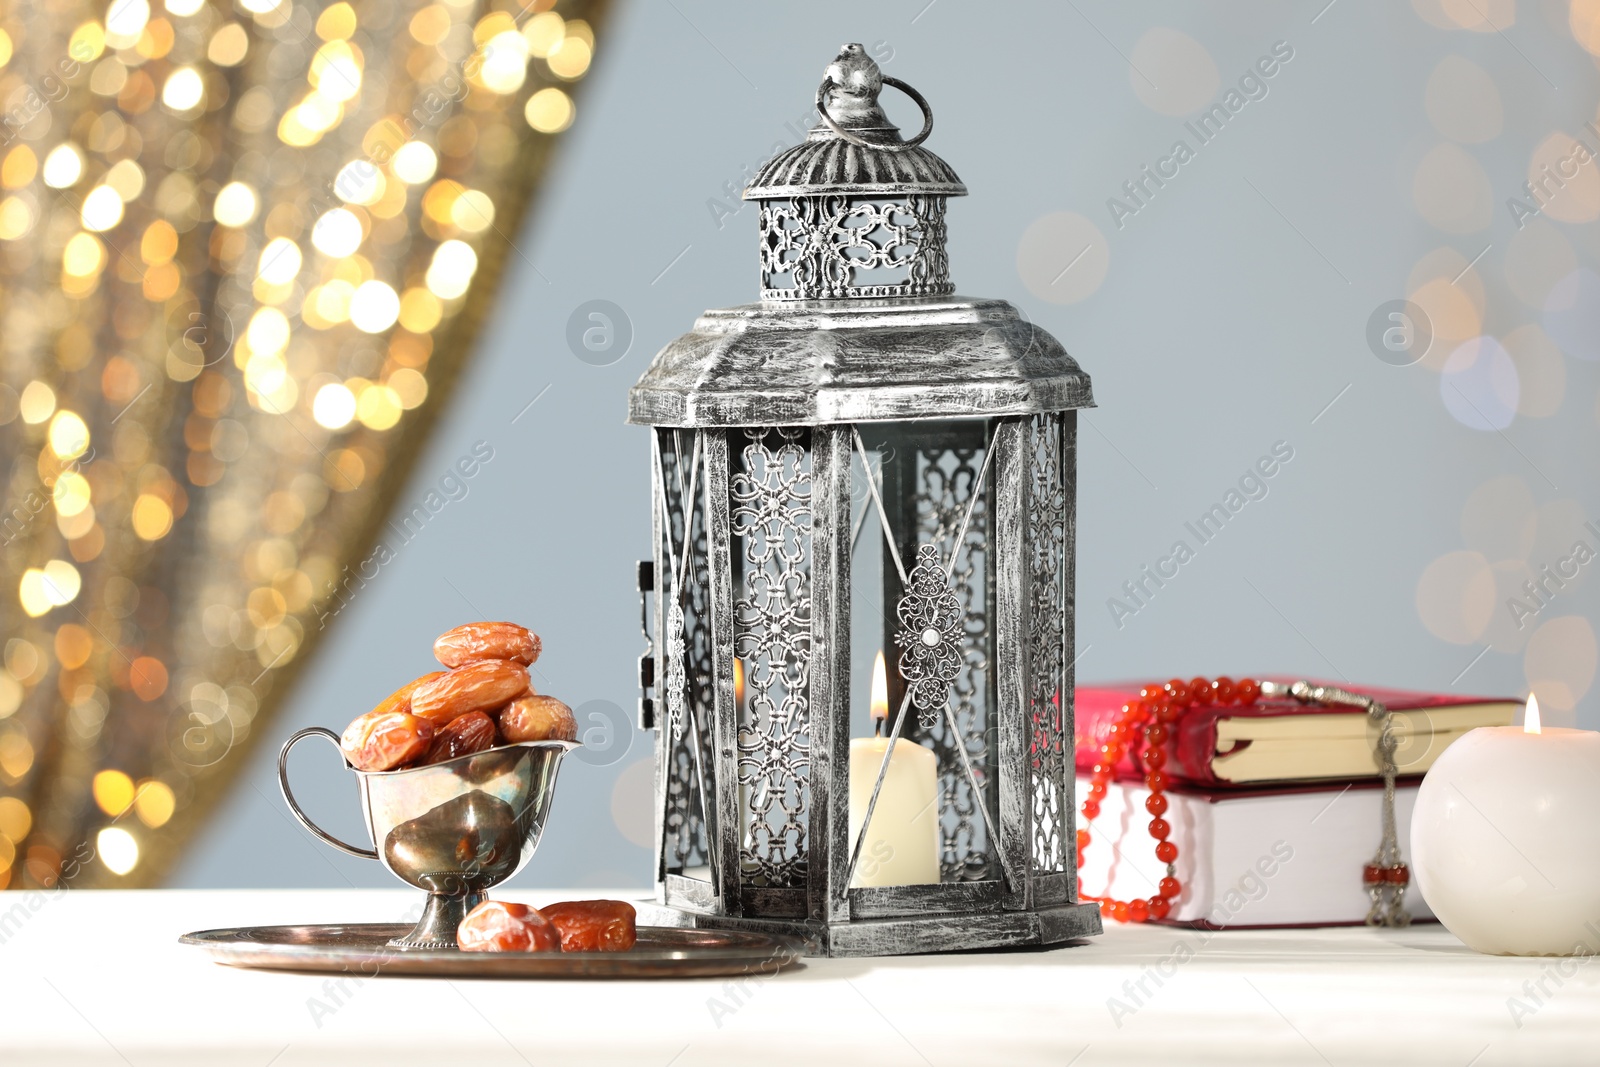 Photo of Arabic lantern, Quran, misbaha, candle and dates on white table against blurred lights